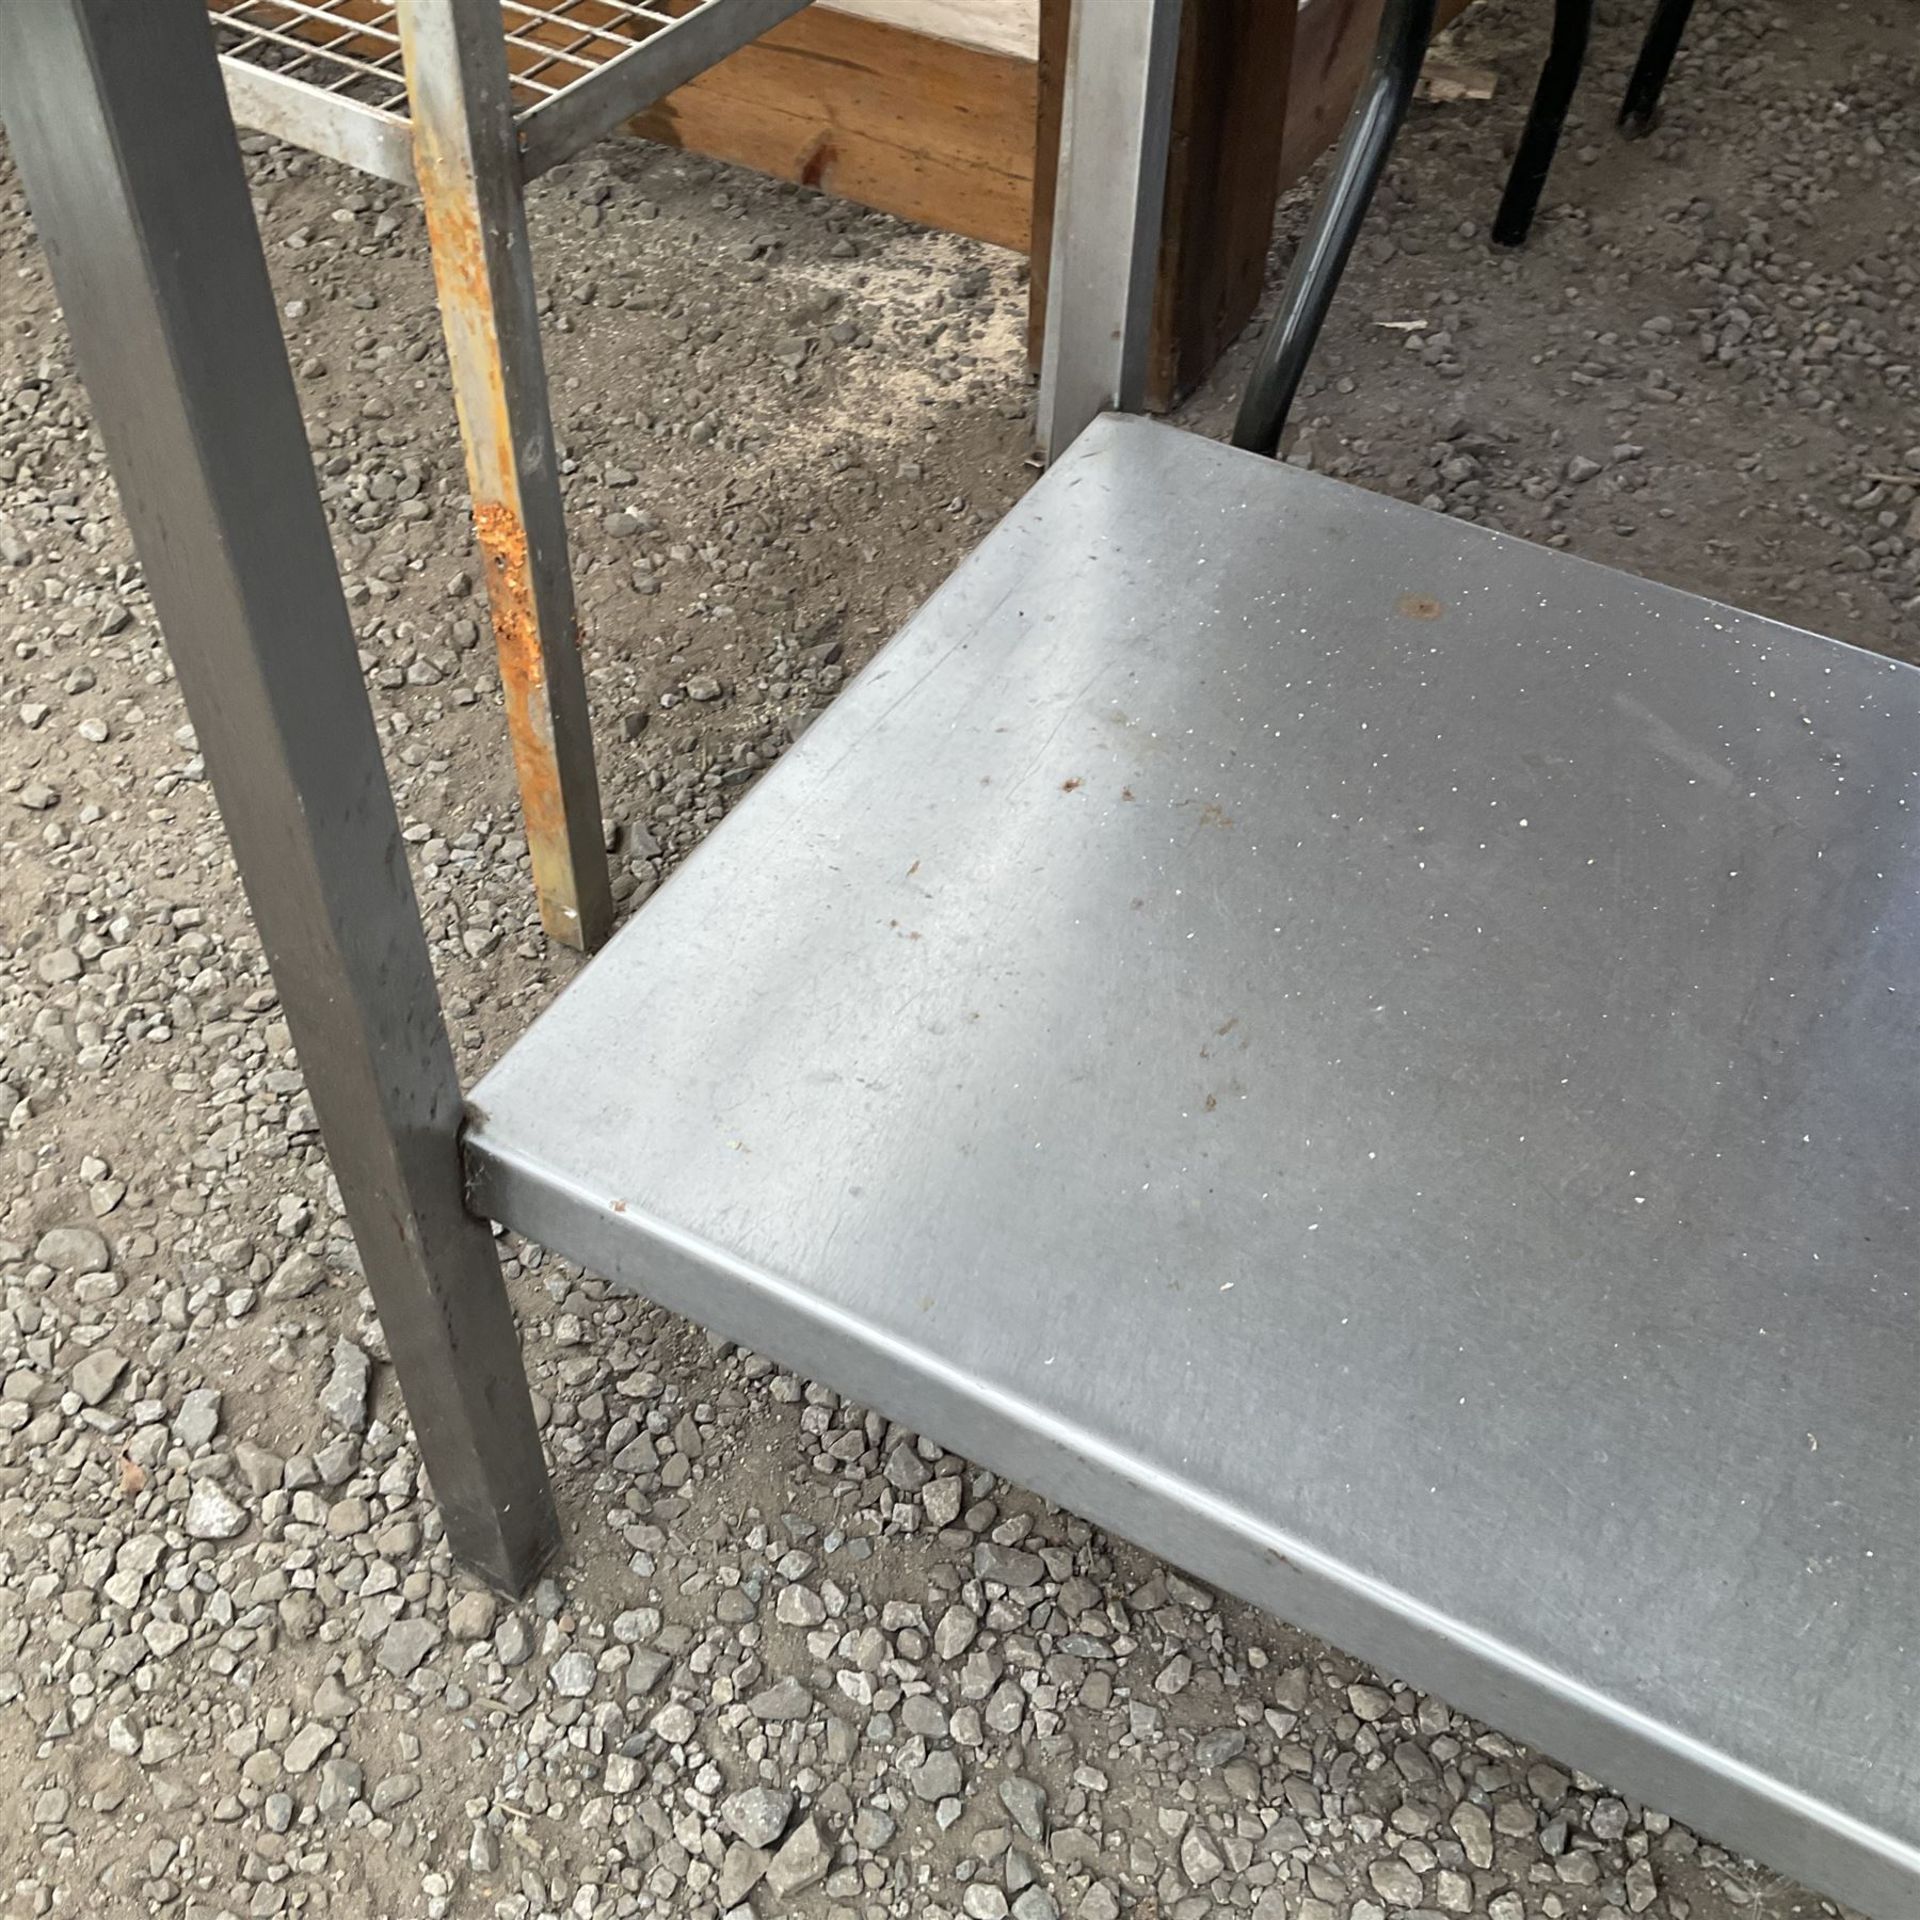 Small commercial stainless steel two tier preparation table - Image 3 of 3